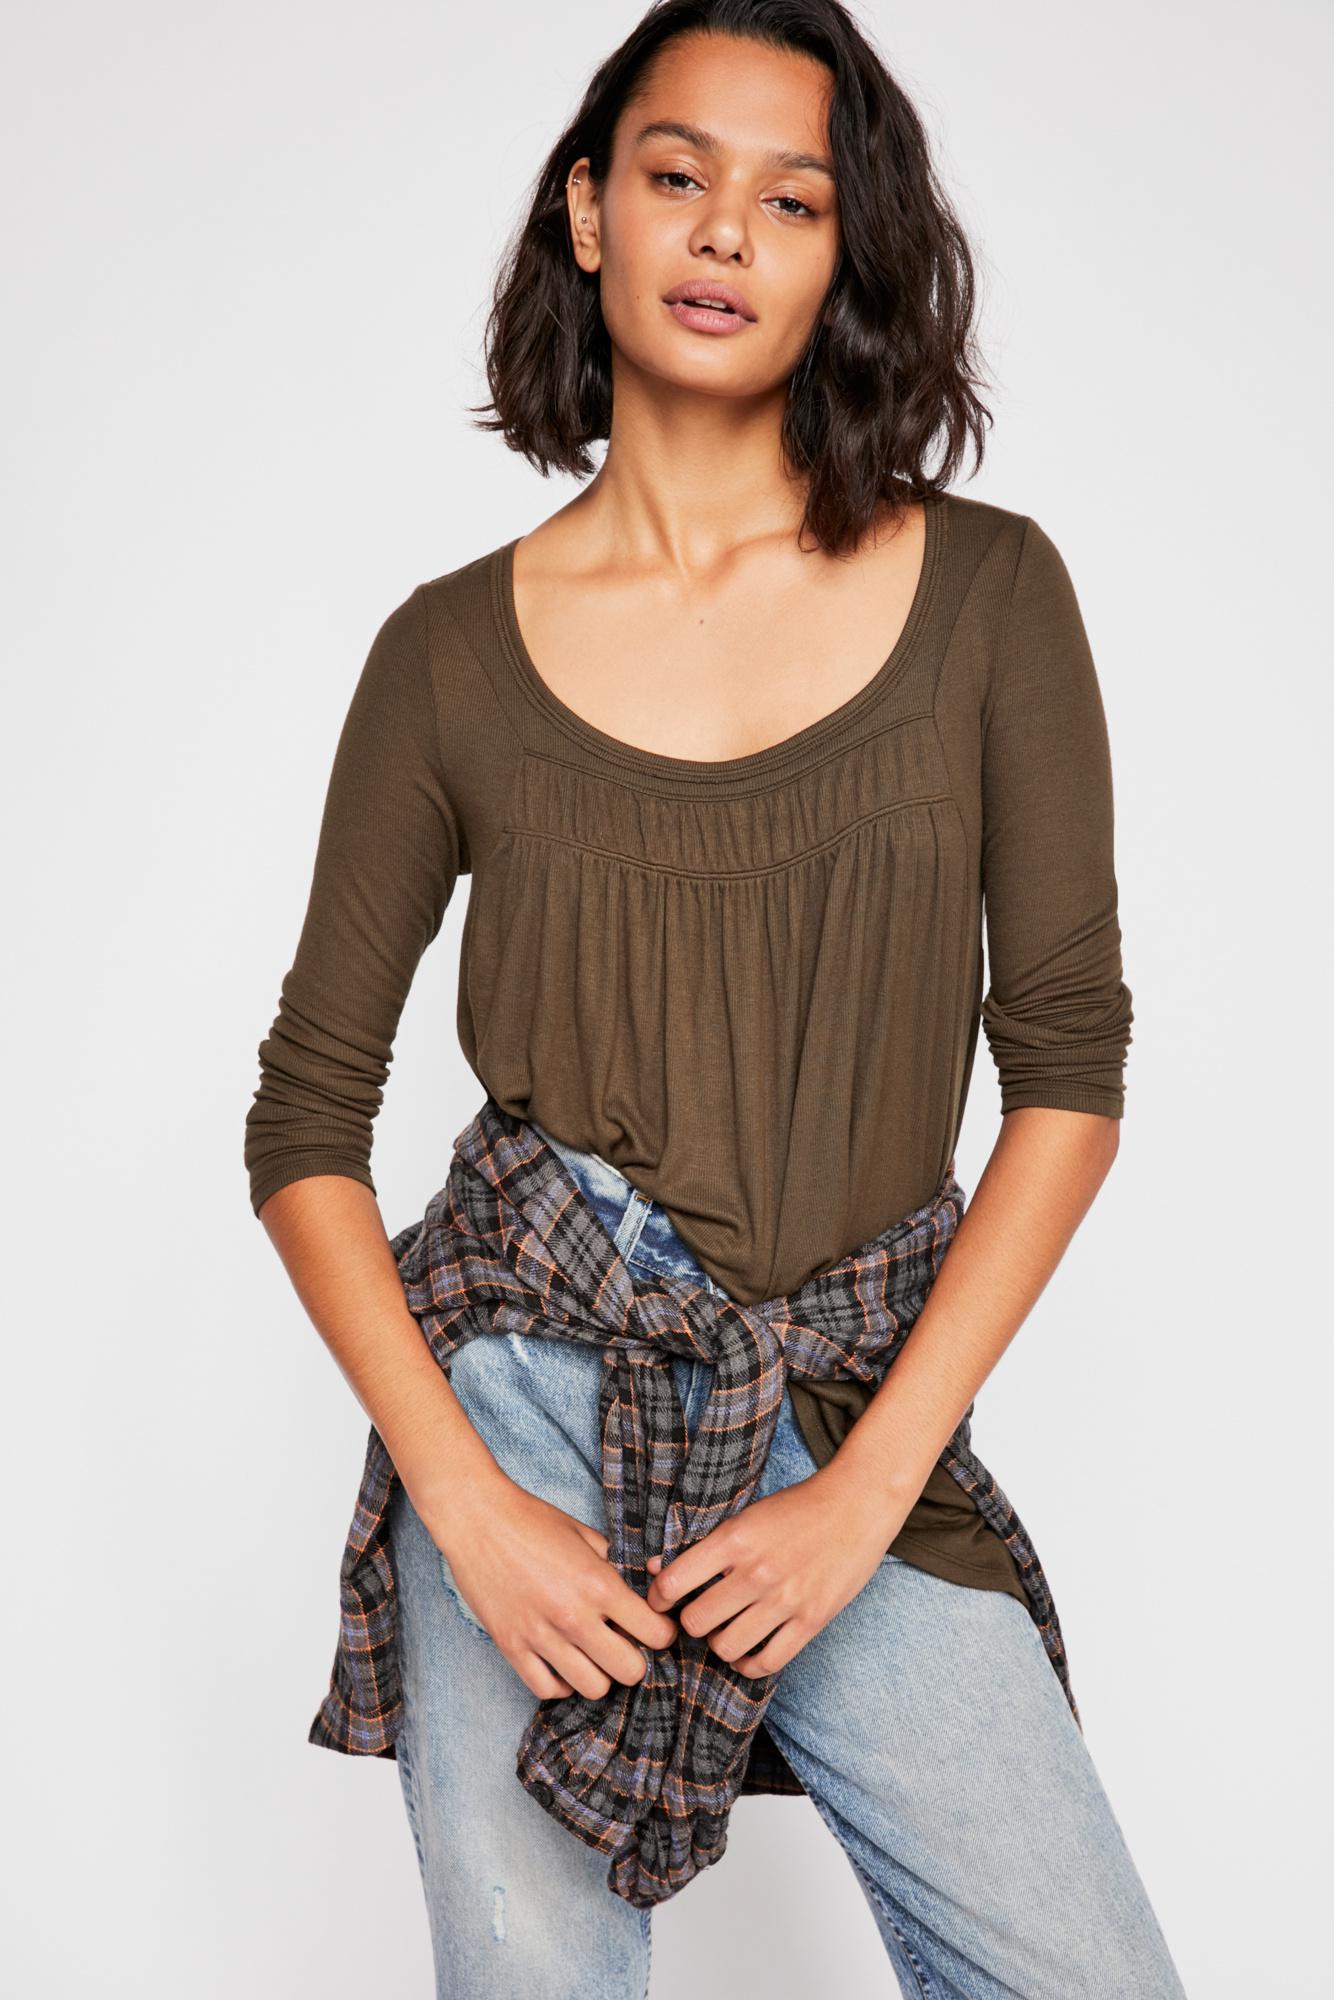 Free People Synthetic We The Free Love Valley Long Sleeve Top in 